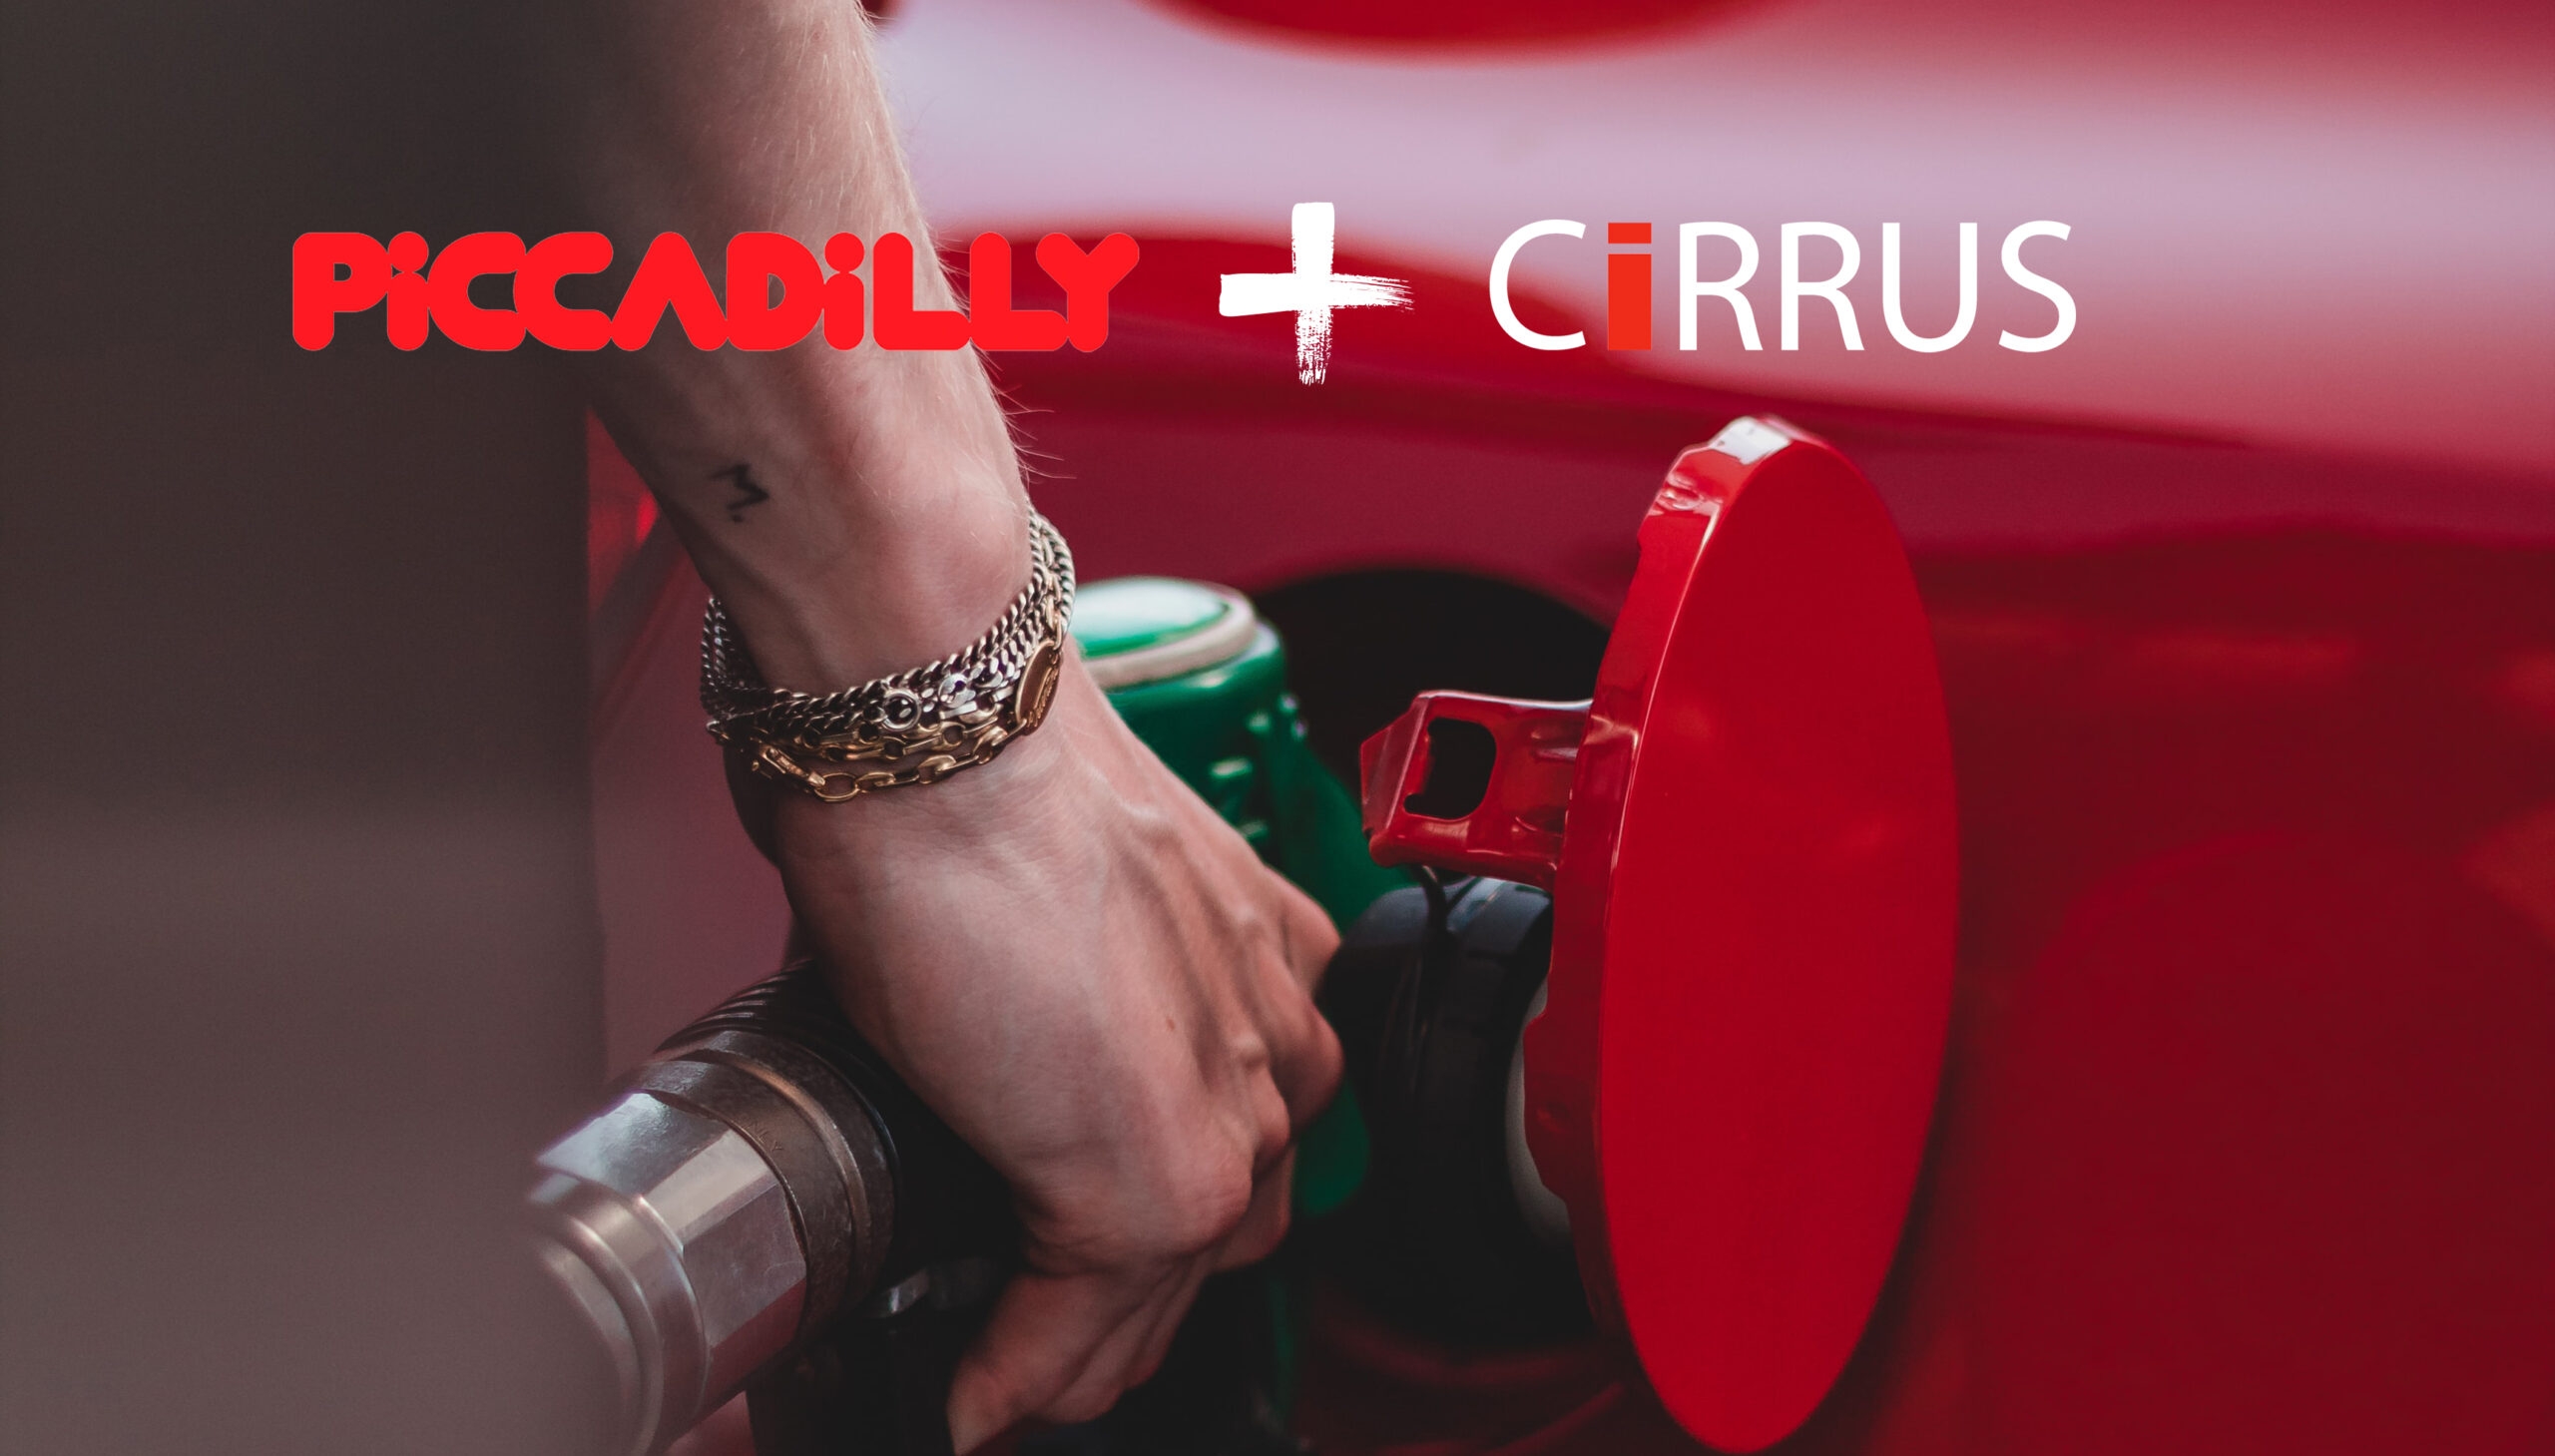 PICCADILLY (Tessin, Switzerland) introduces the CiRRUS Business Solution!